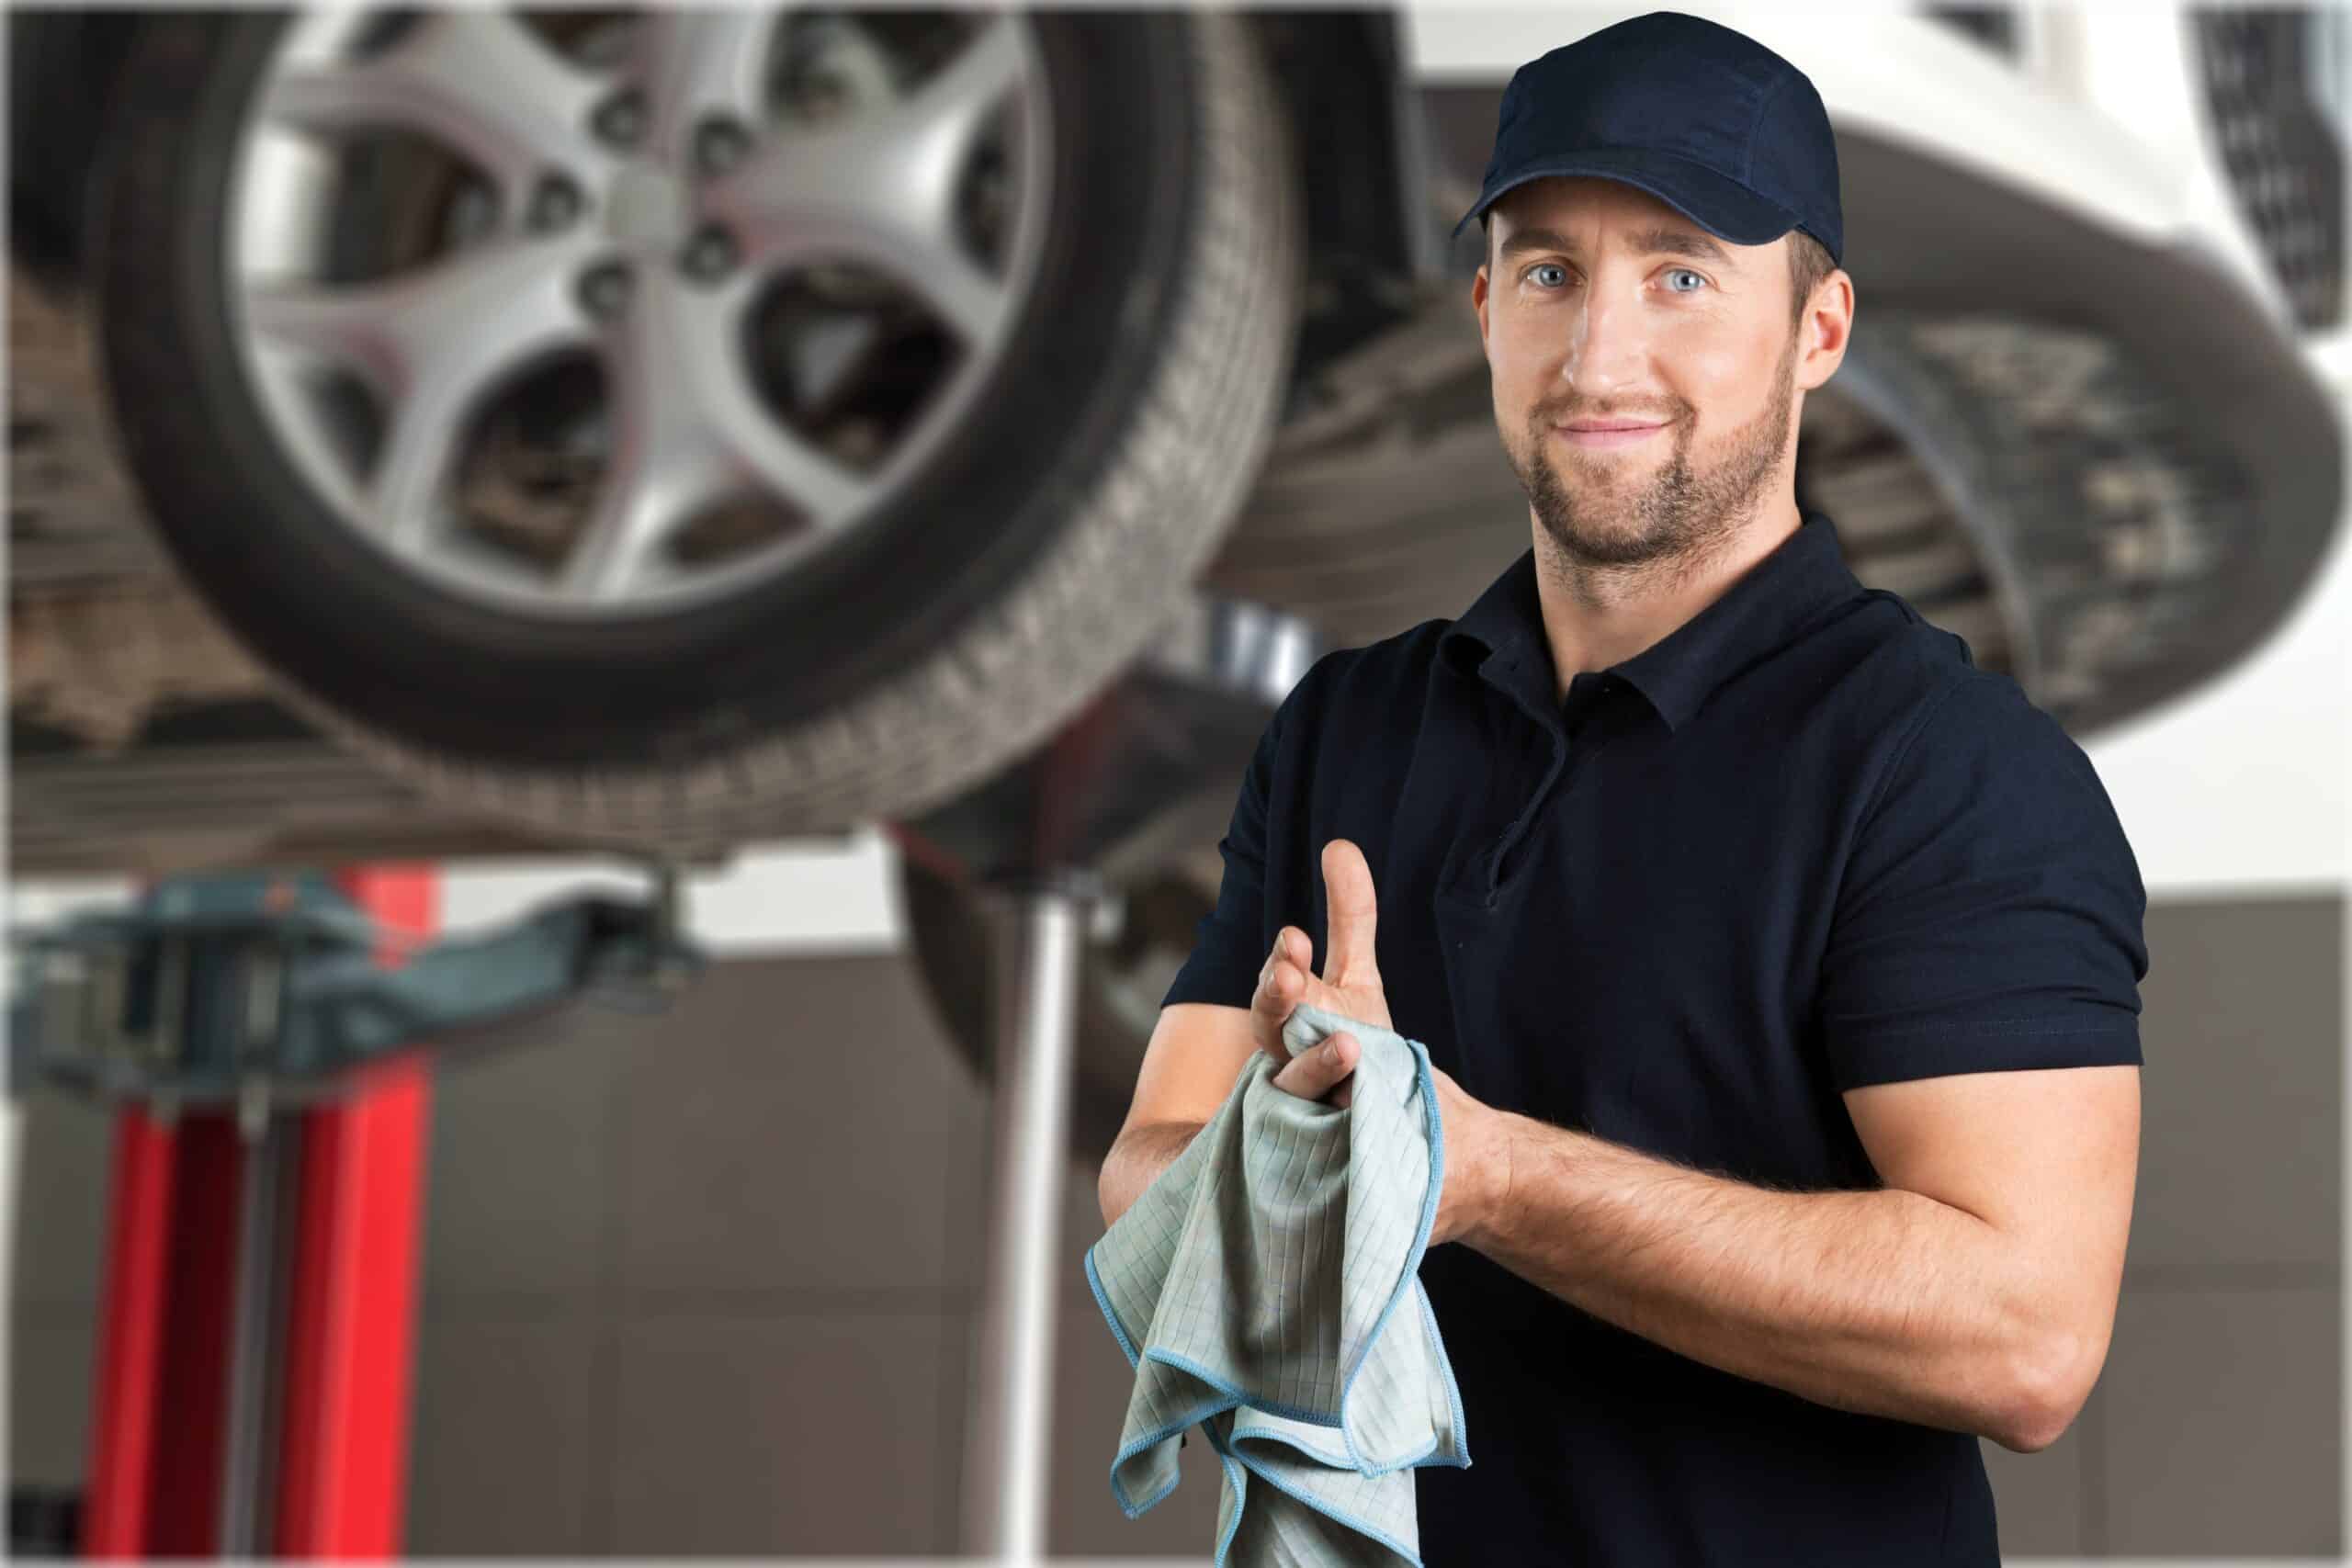 11 Things to Look for When Choosing a Mechanic